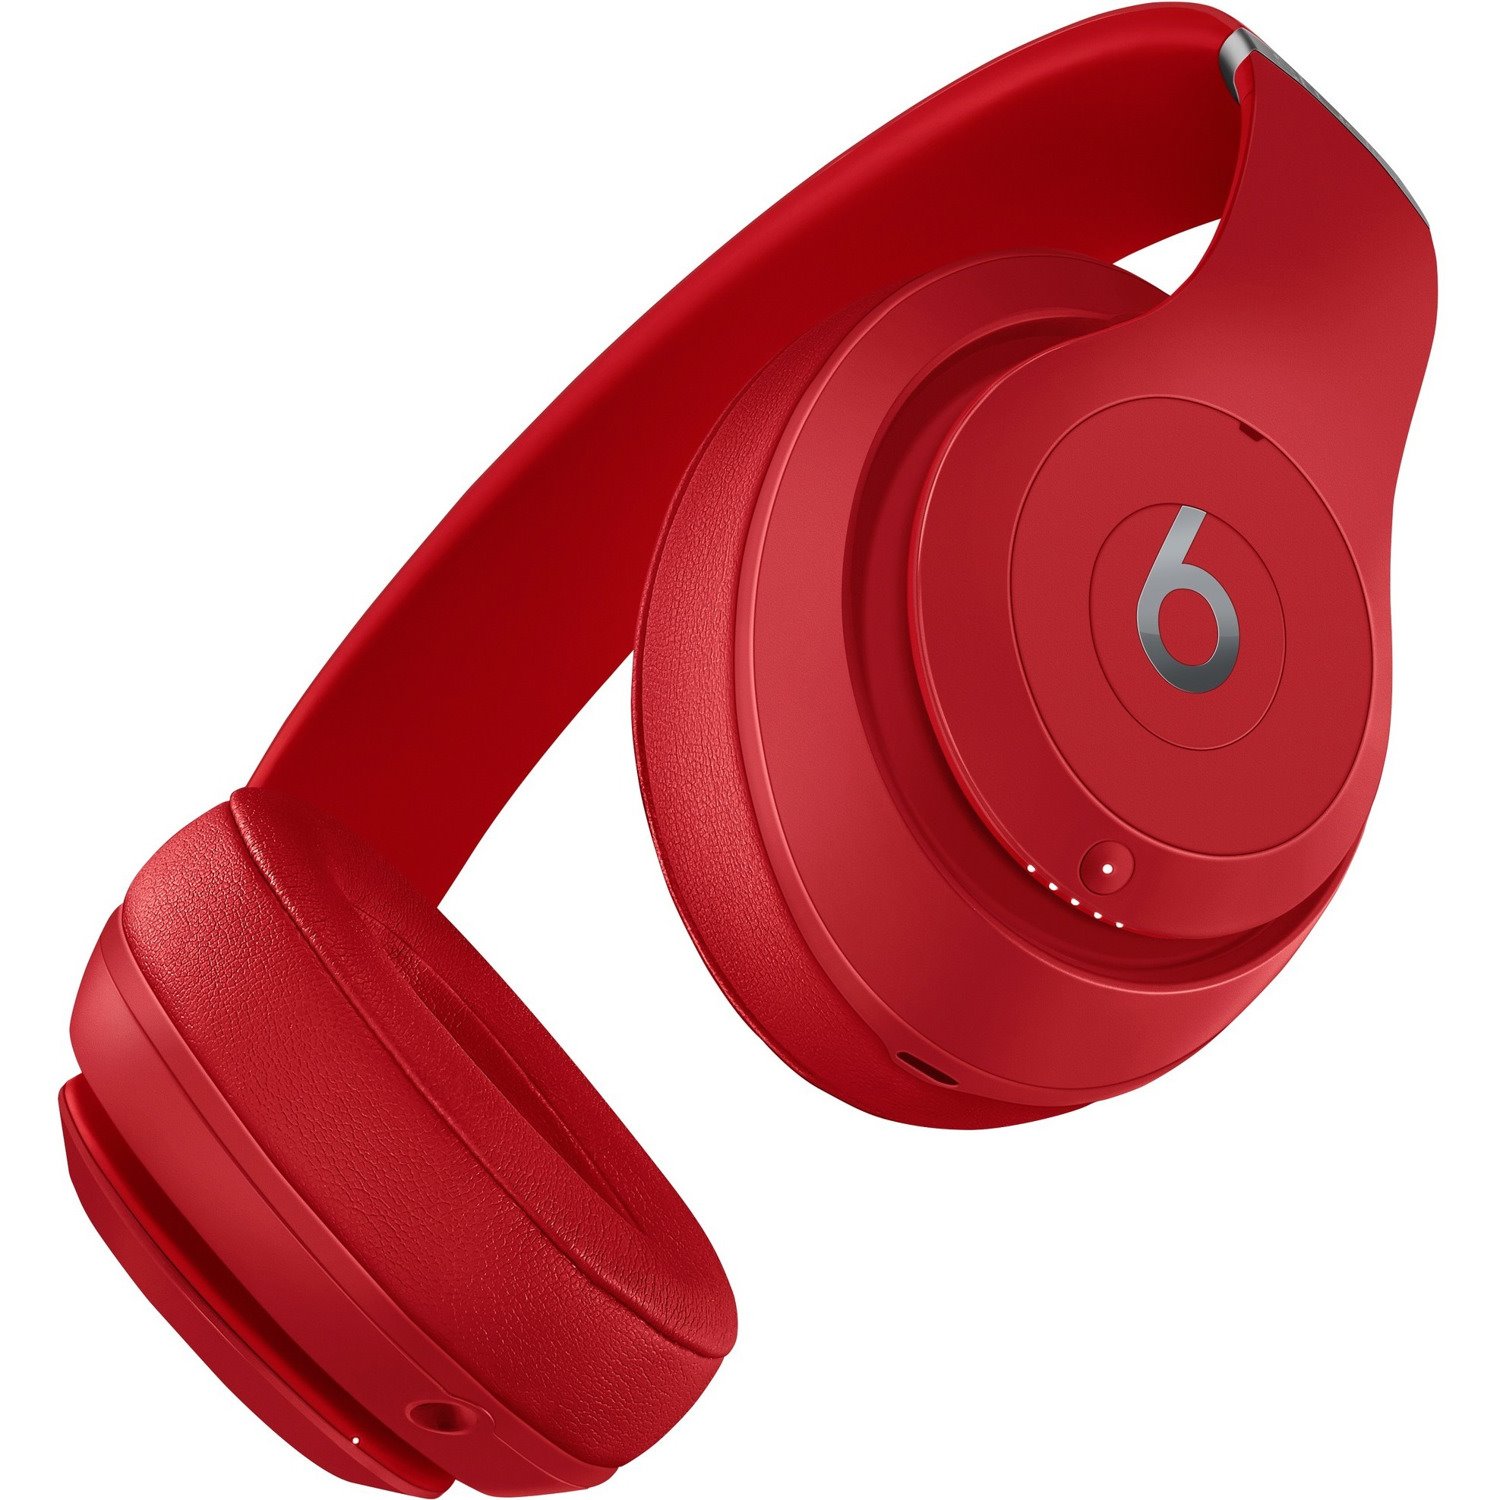 Beats by Dr. Dre Studio3 Wireless Over-Ear Headphones - Red